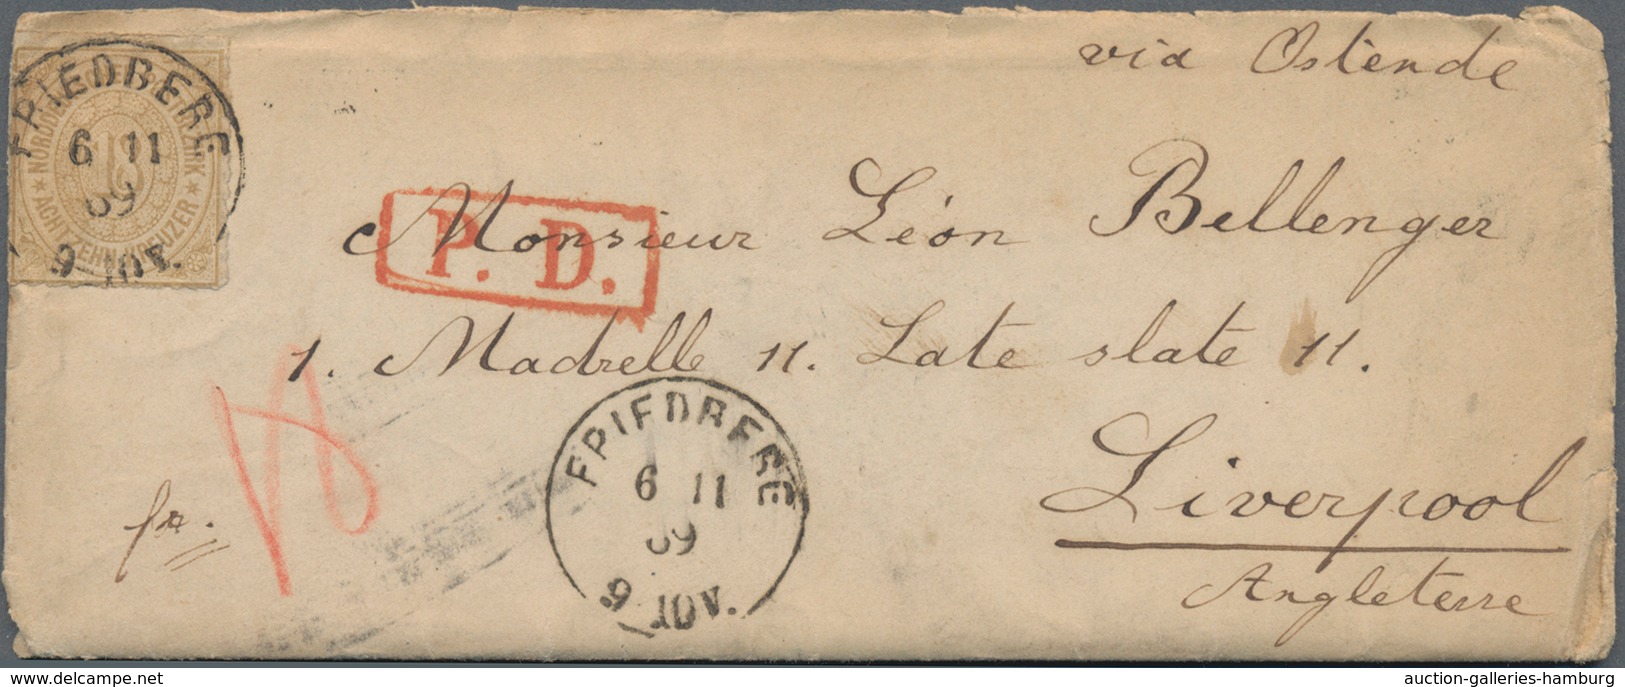 Alle Welt: 1861-1928 about 110 covers and postal stationeries many from a correspondance to France i